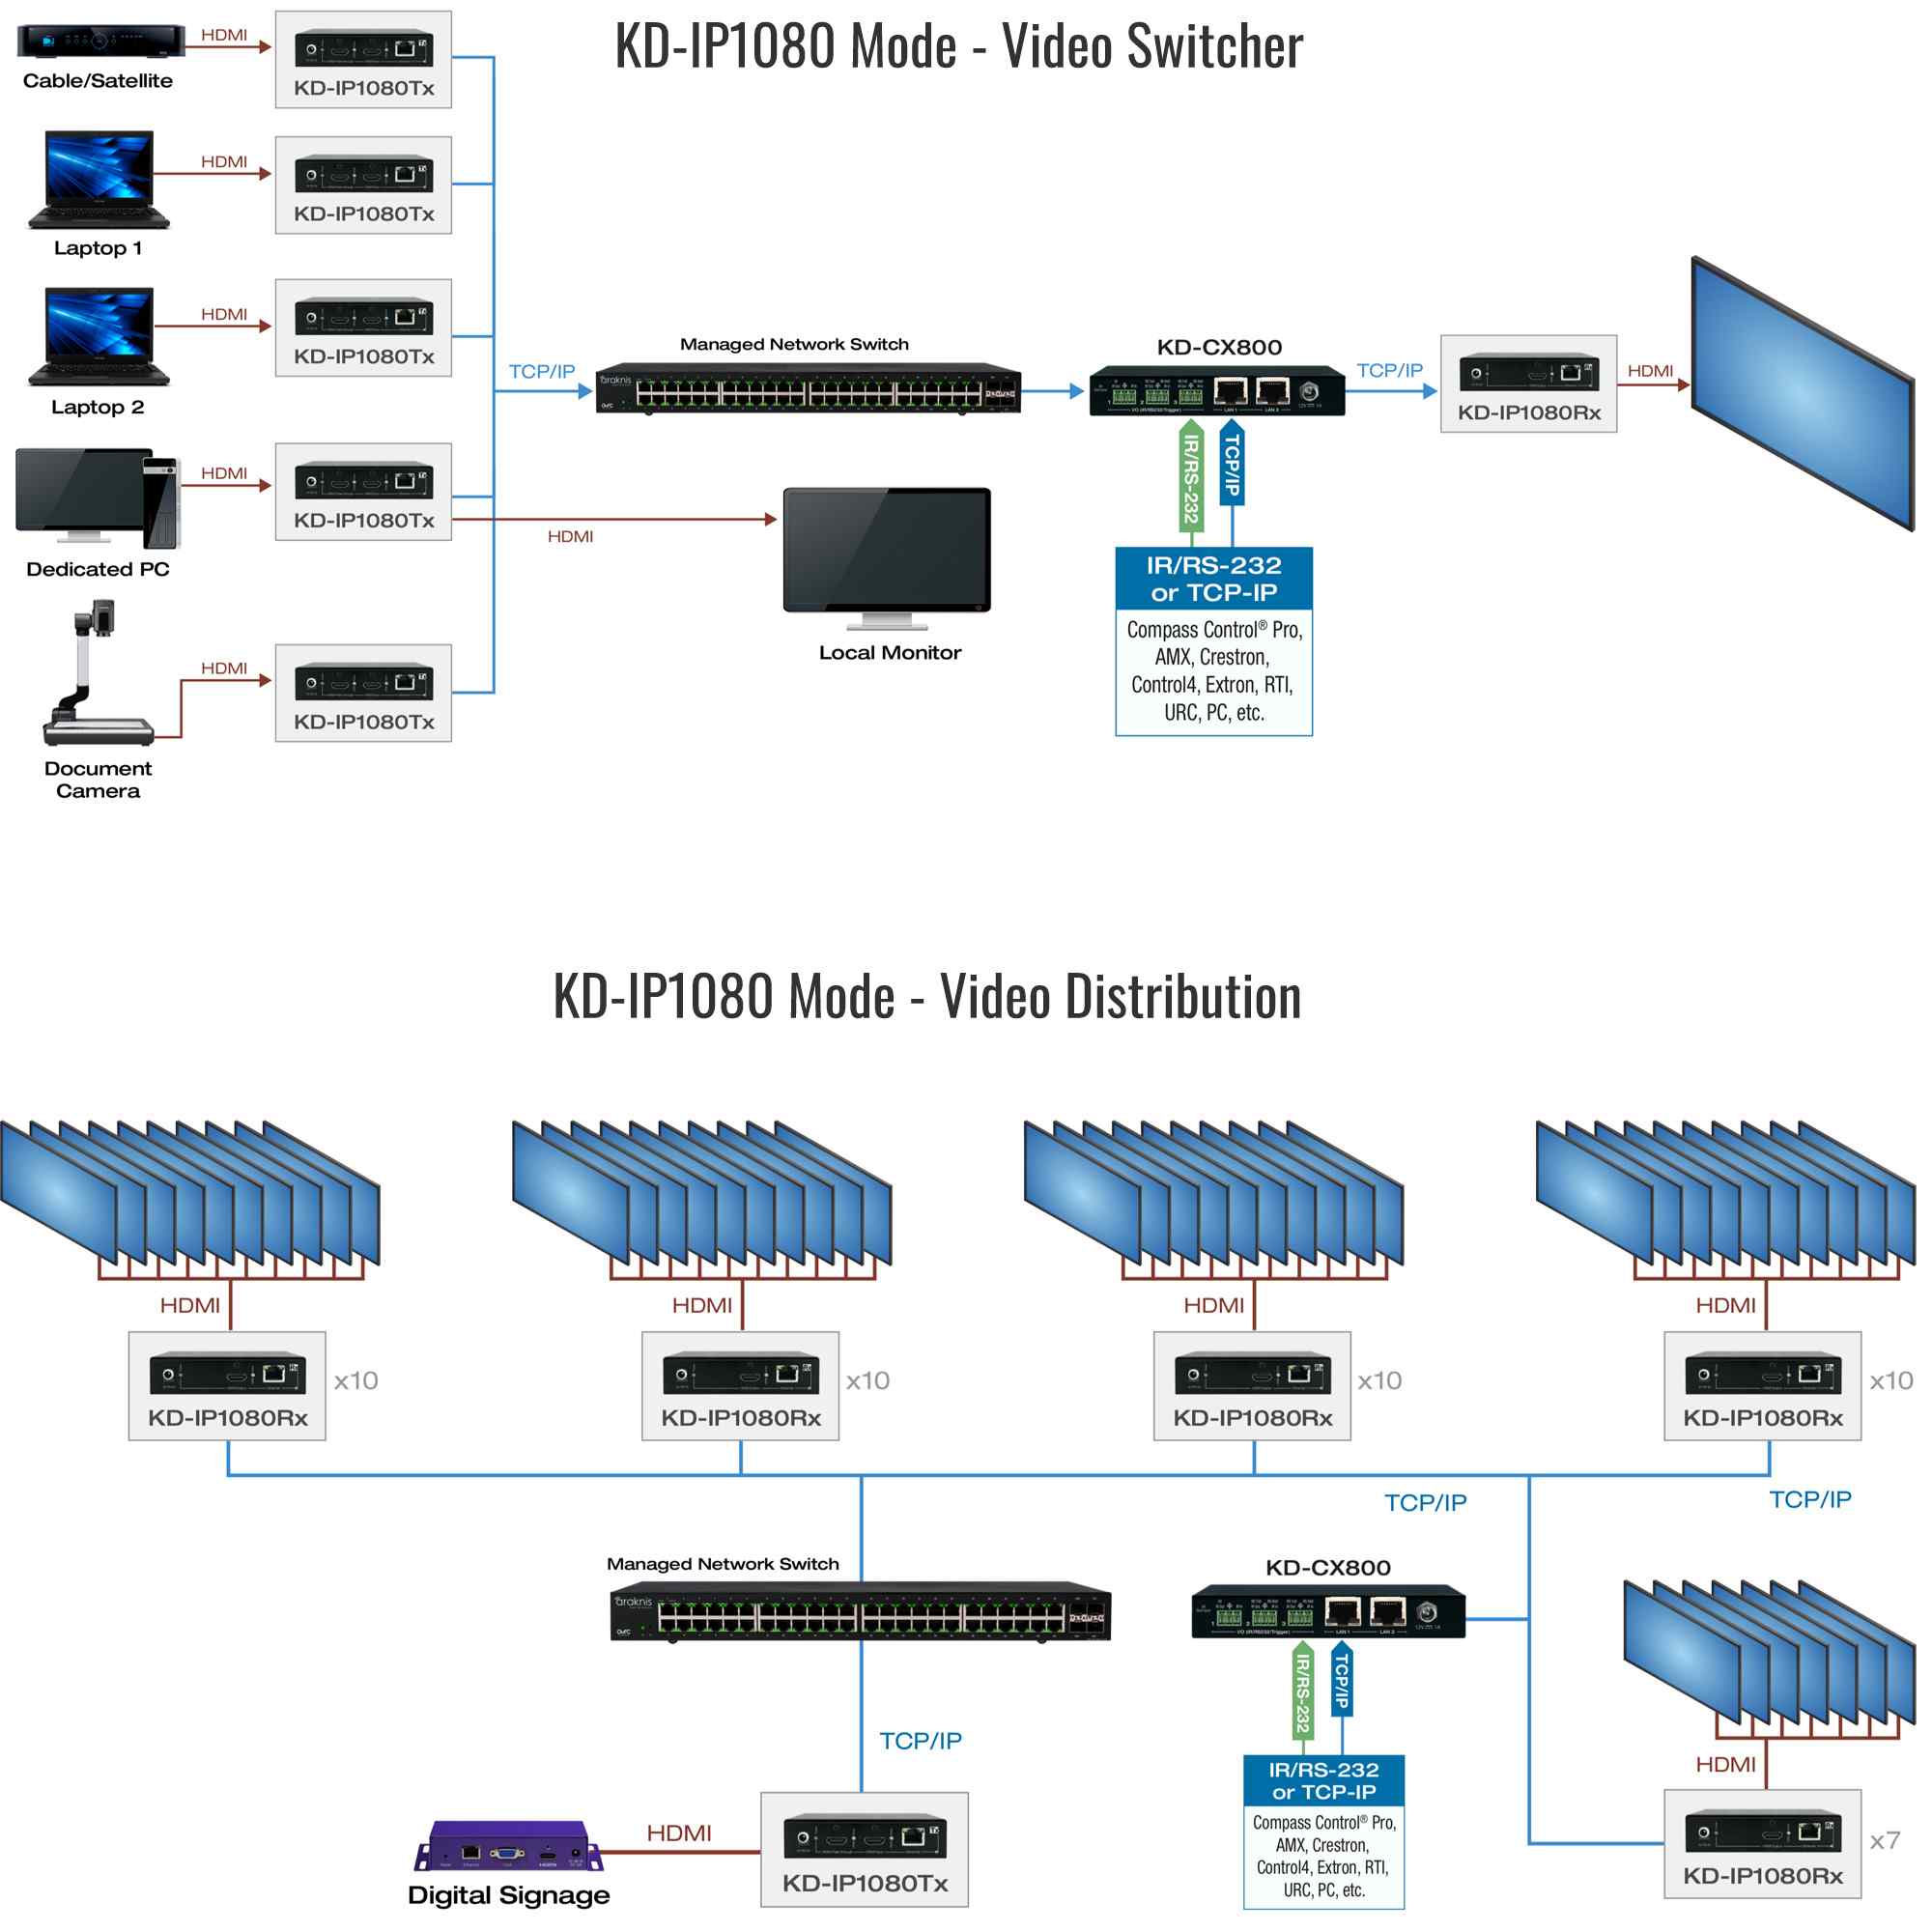 Example Diagram showing the video switch and distribution mode of AV over IP System 